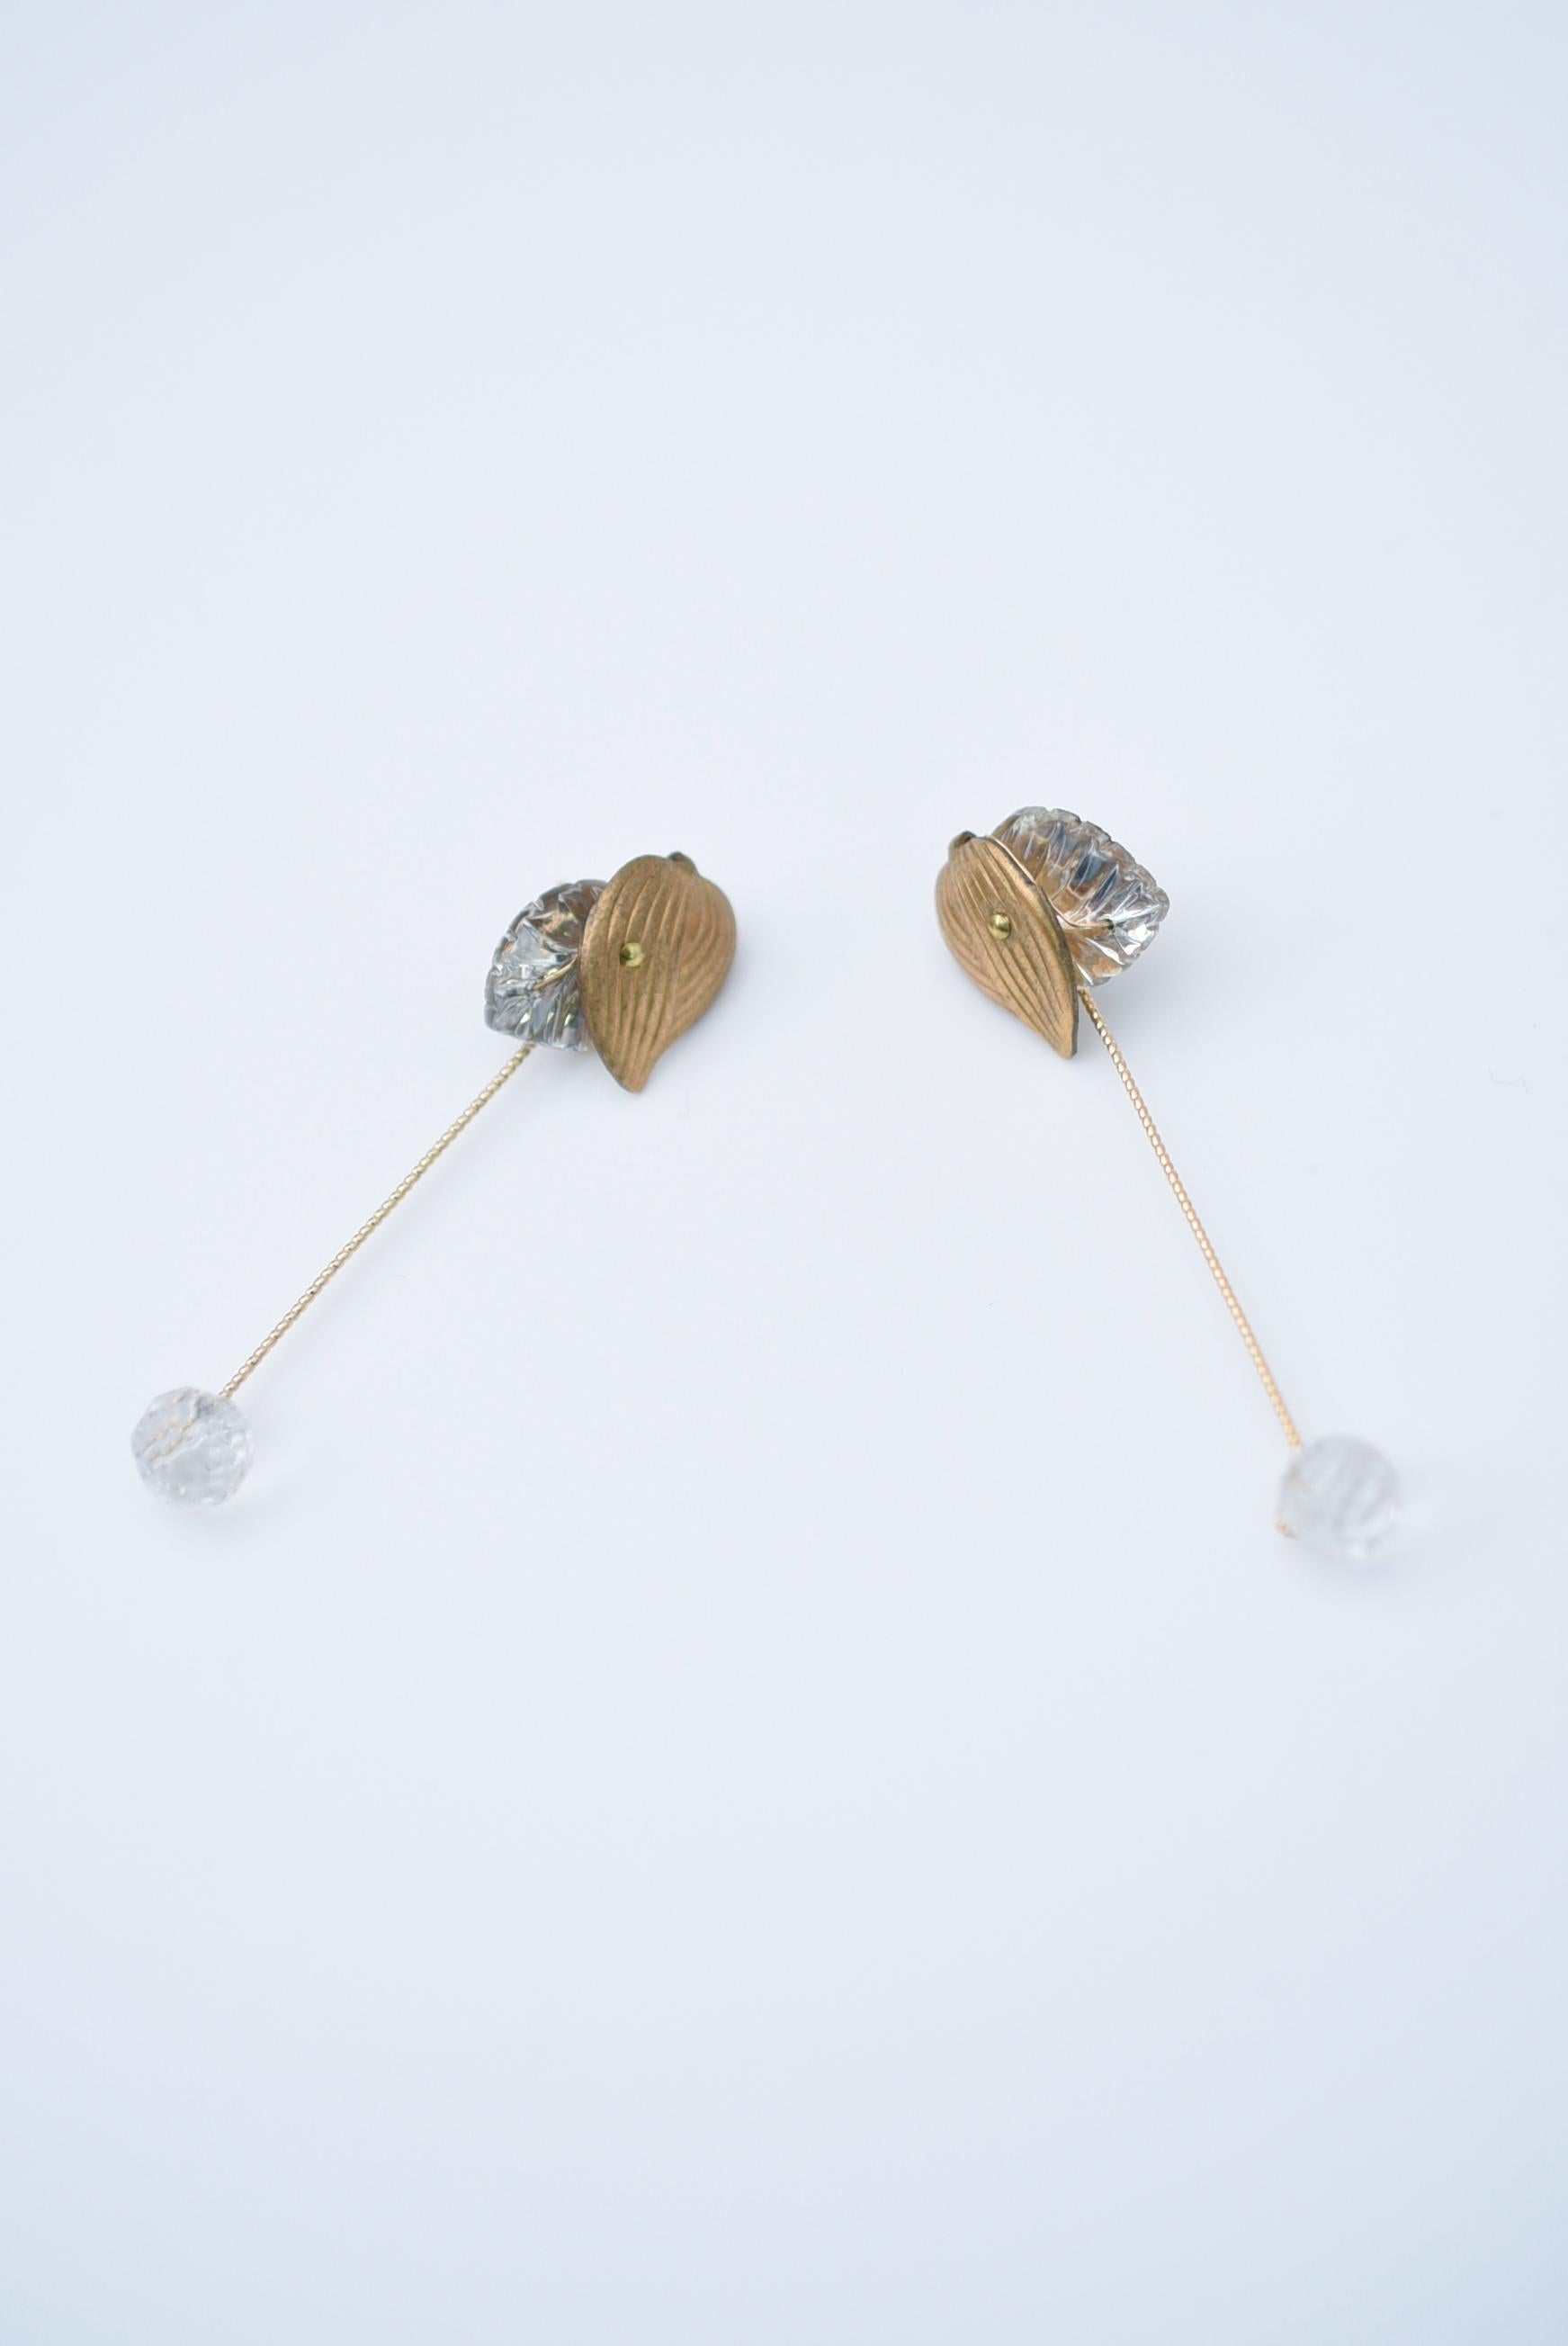 material:Brass, Vintage 1970s Japanese Glass Pearl, American 1970s Metal Parts, German Vintage Glass, French vintage button, German vintage glass
size:length 6cm


Earrings can be used in 2 ways.
The line part swings from below the dogwood